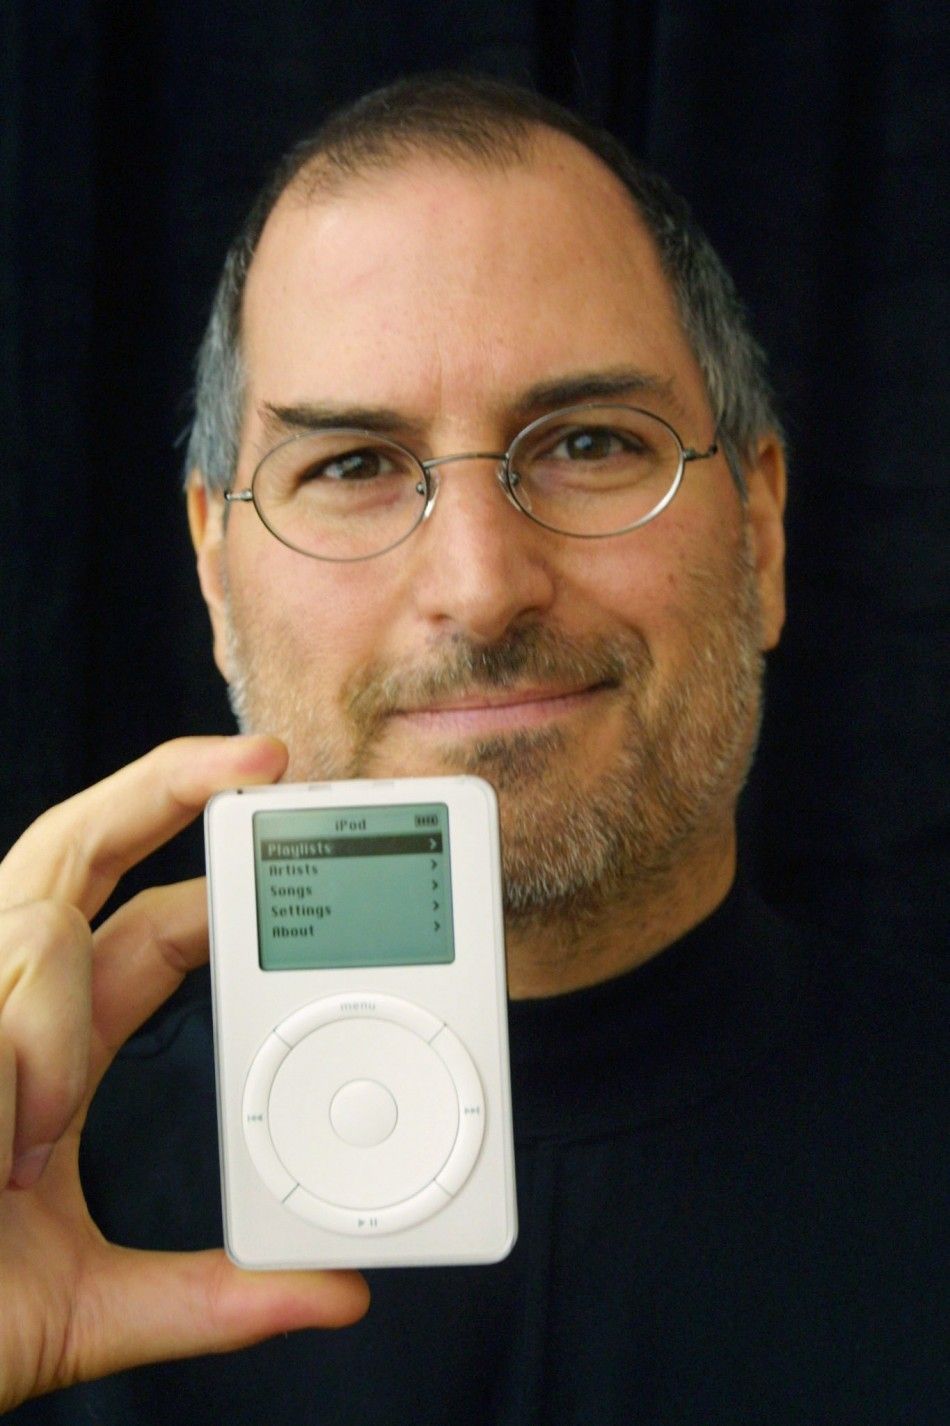 Apple Computer CEO Steve Jobs holds up the new Apple release iPod in Cupertino, California October 23, 2001. The new MP3 iPod music player packs up to 1,000 CD-quality songs into an ultra-portable, 6.5 ounce design that fits in your pocket.